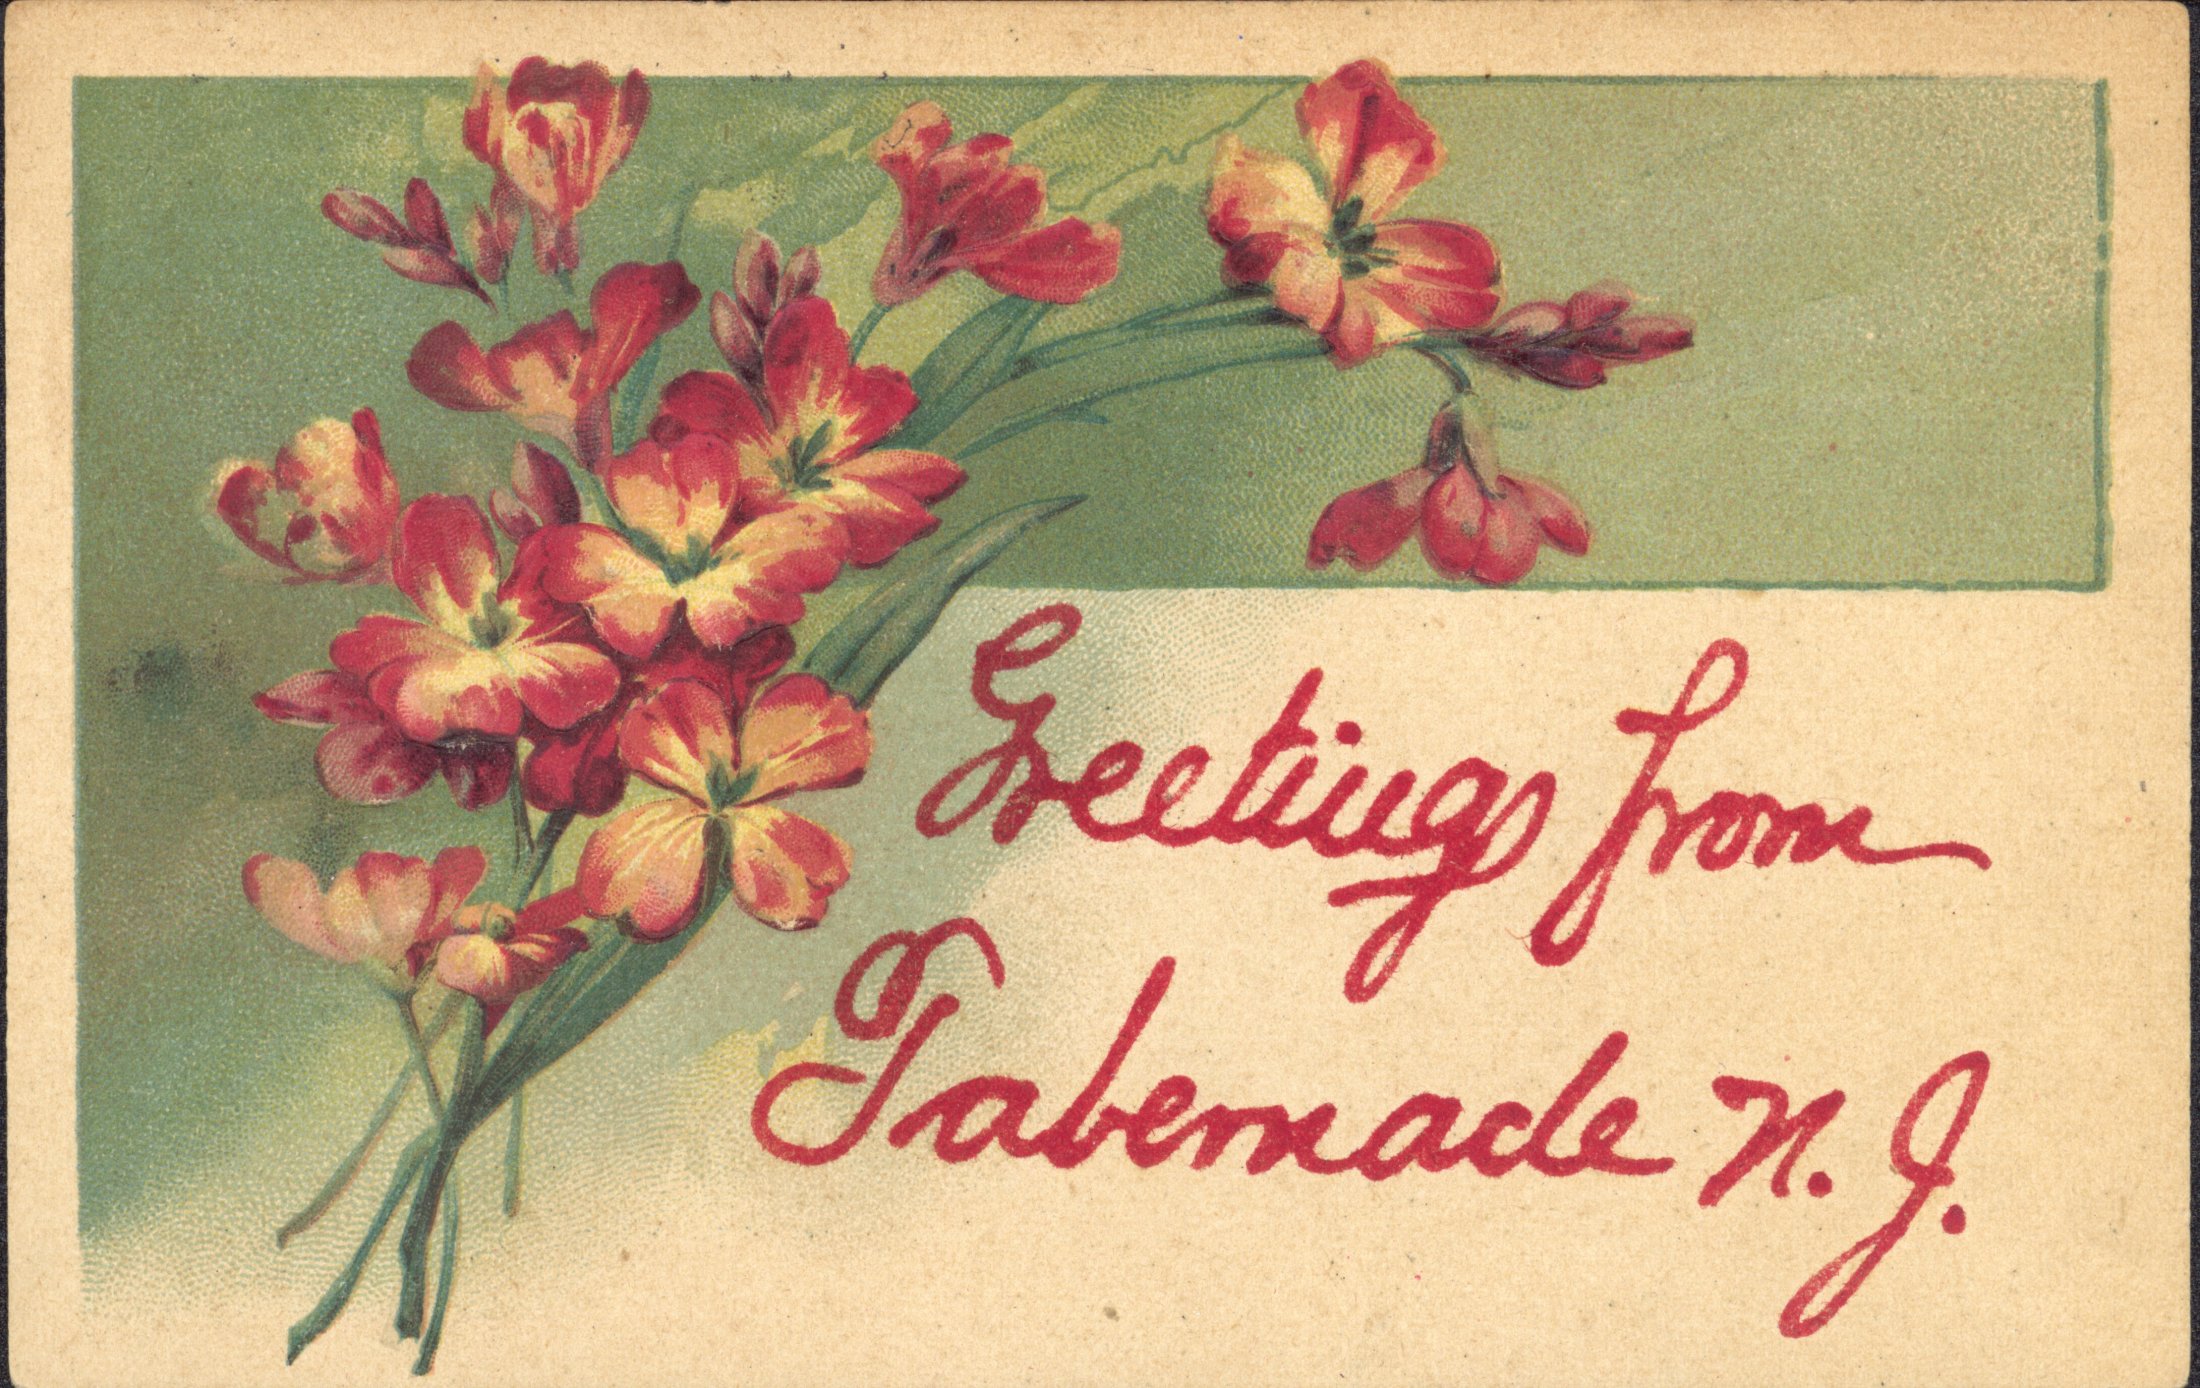 Tabernacle - Greetings from Tabernacle-2 - undated - RW